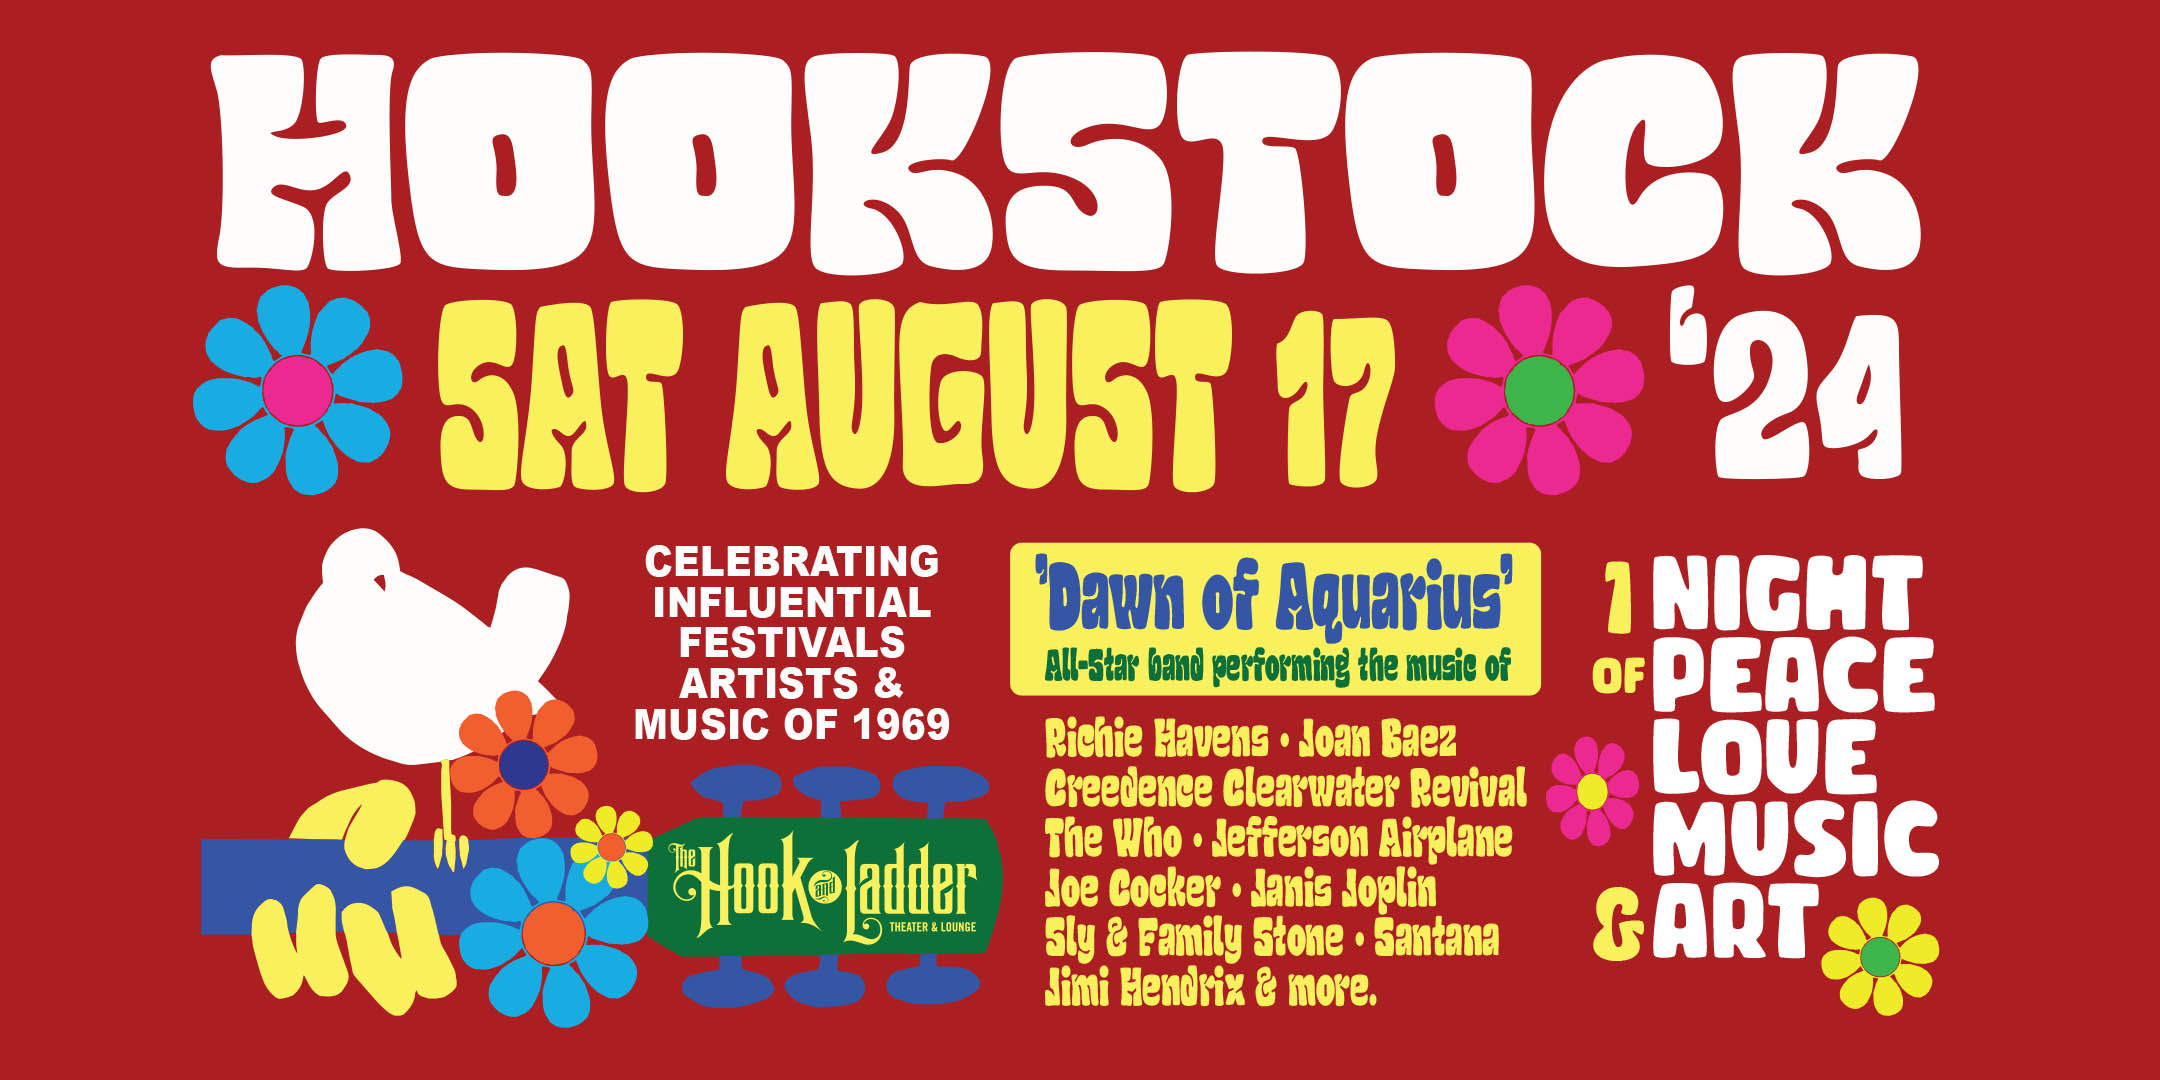 HOOKSTOCK '24 Celebrating the Influential Festivals, Artists, and Music of 1969 Saturday, August 17 The Hook and Ladder Theater Doors 7:30pm :: Music 8:00pm :: 21+ Reserved Seats: $30 (60) GA: $18 ADV / $24 DOS NO REFUNDS